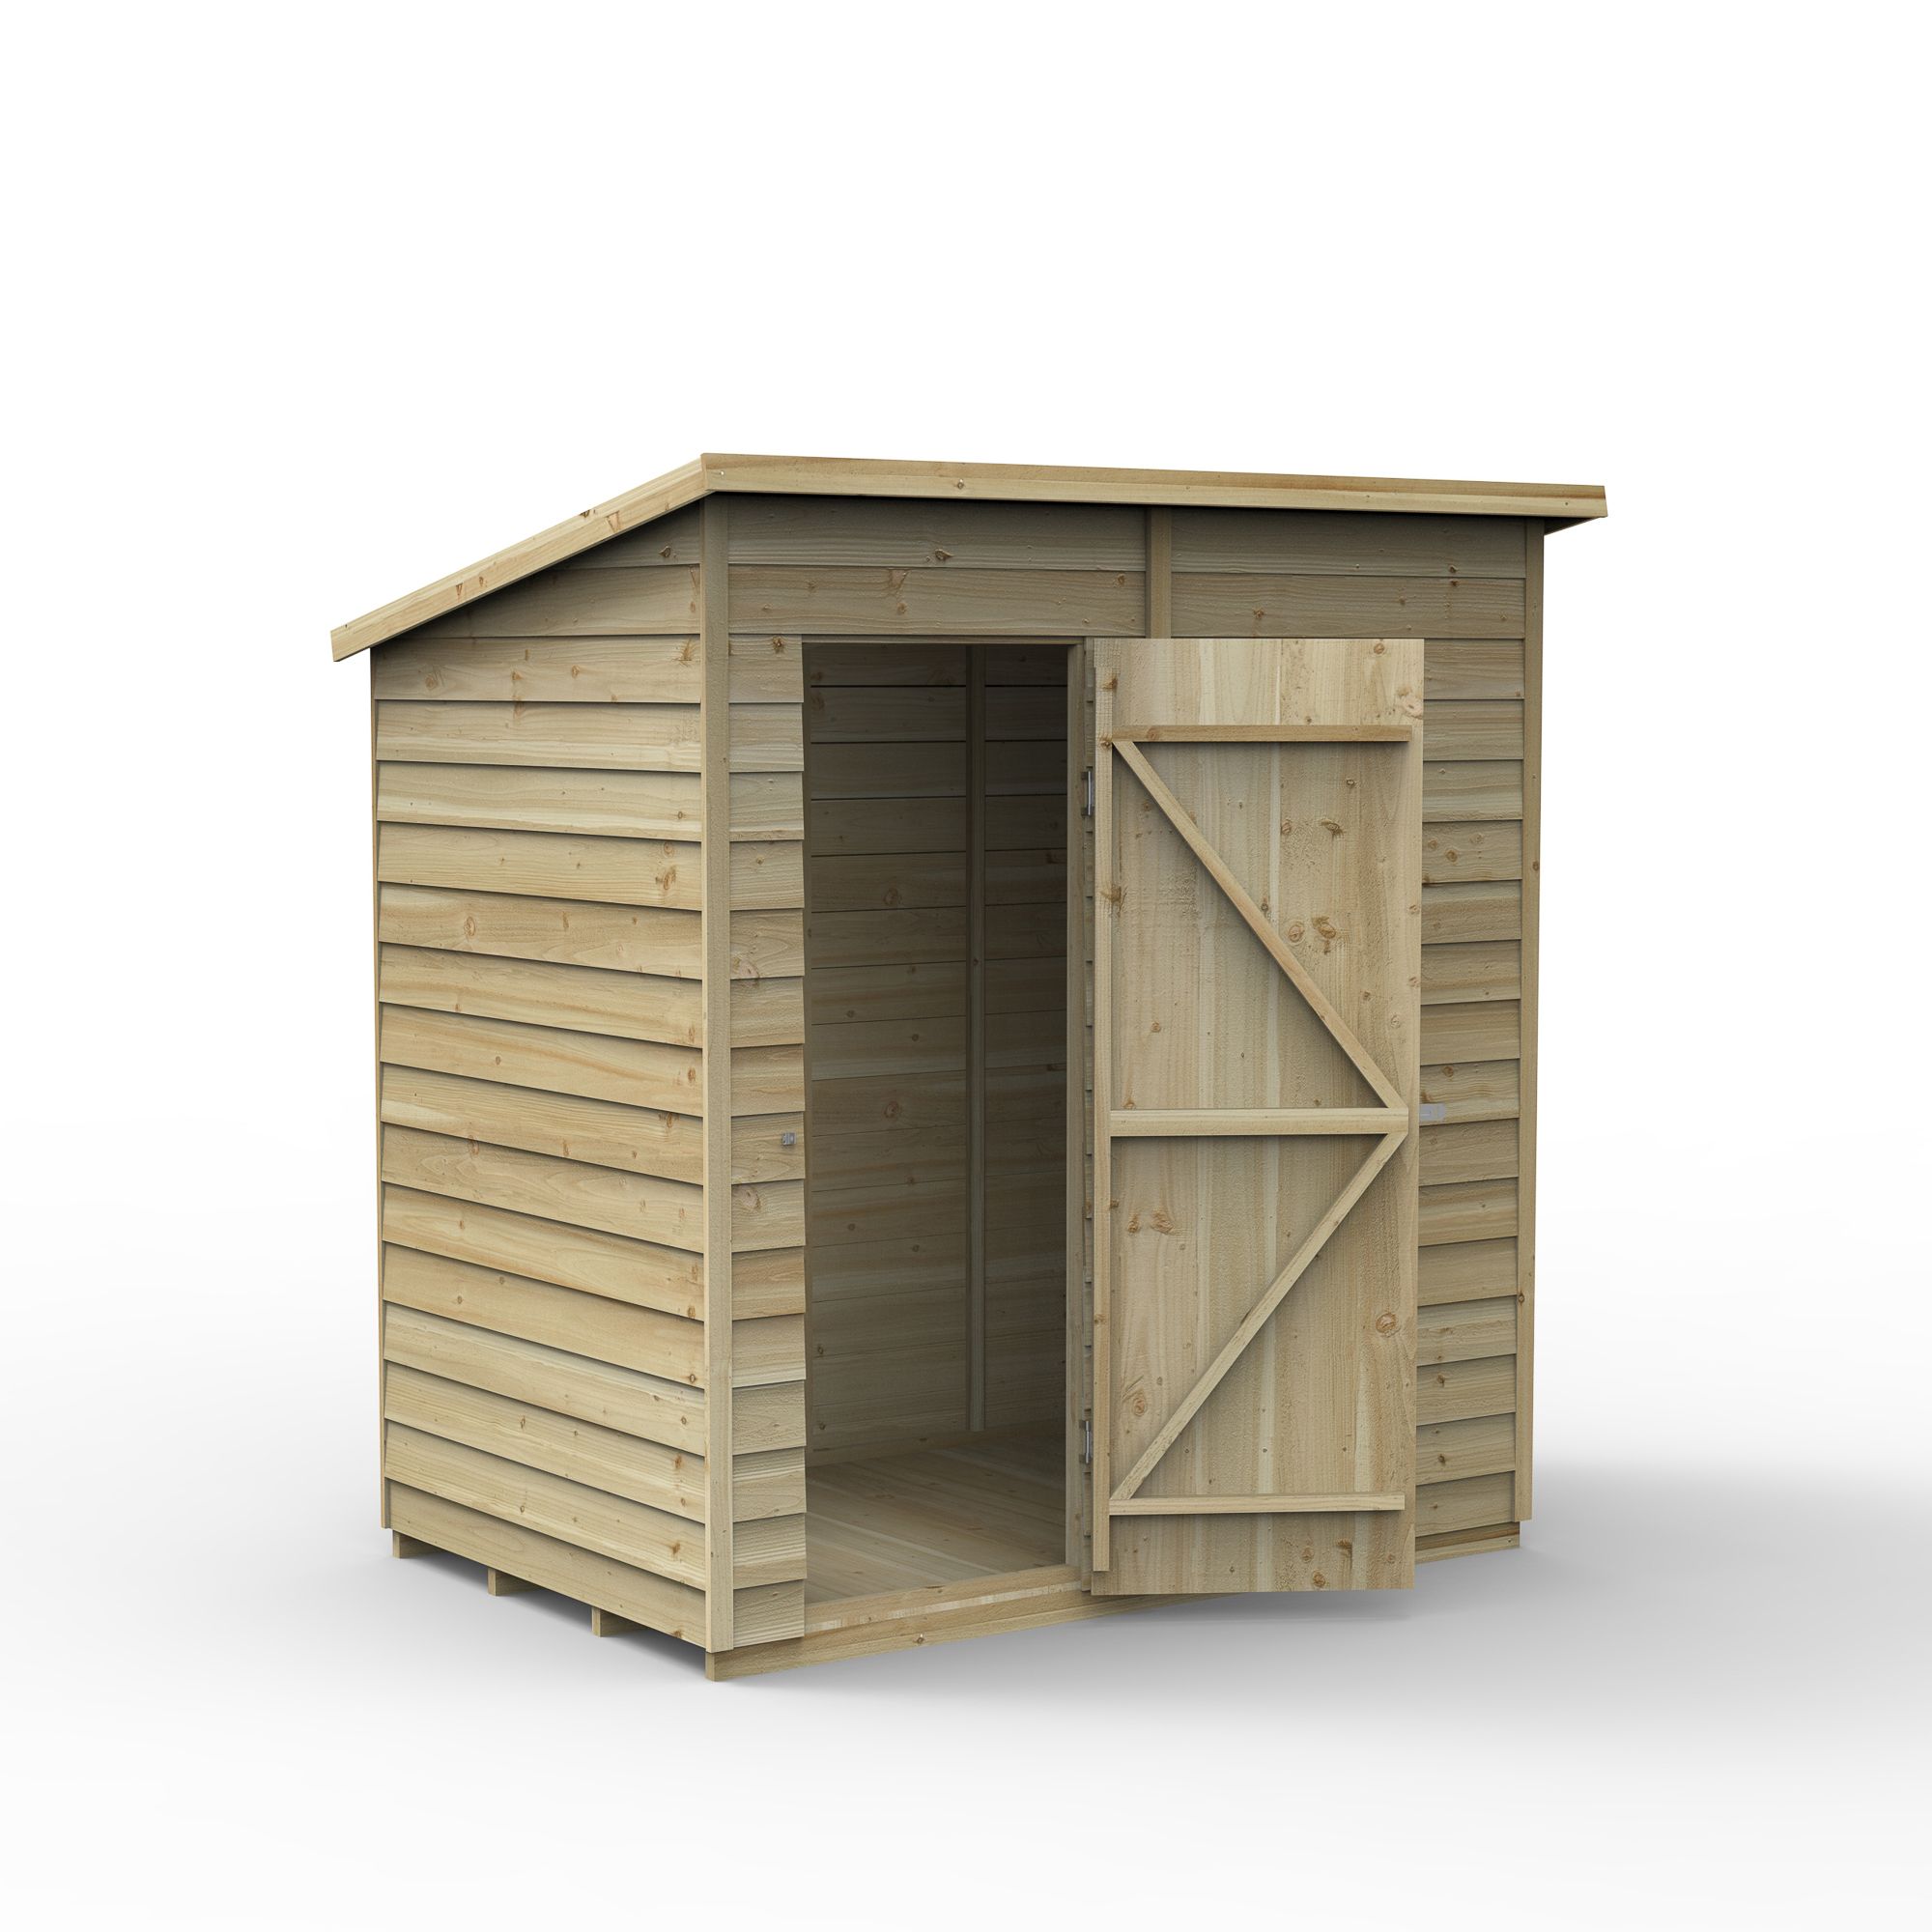 Forest Garden Overlap 6x4 ft Pent Wooden Shed with floor - Assembly service included